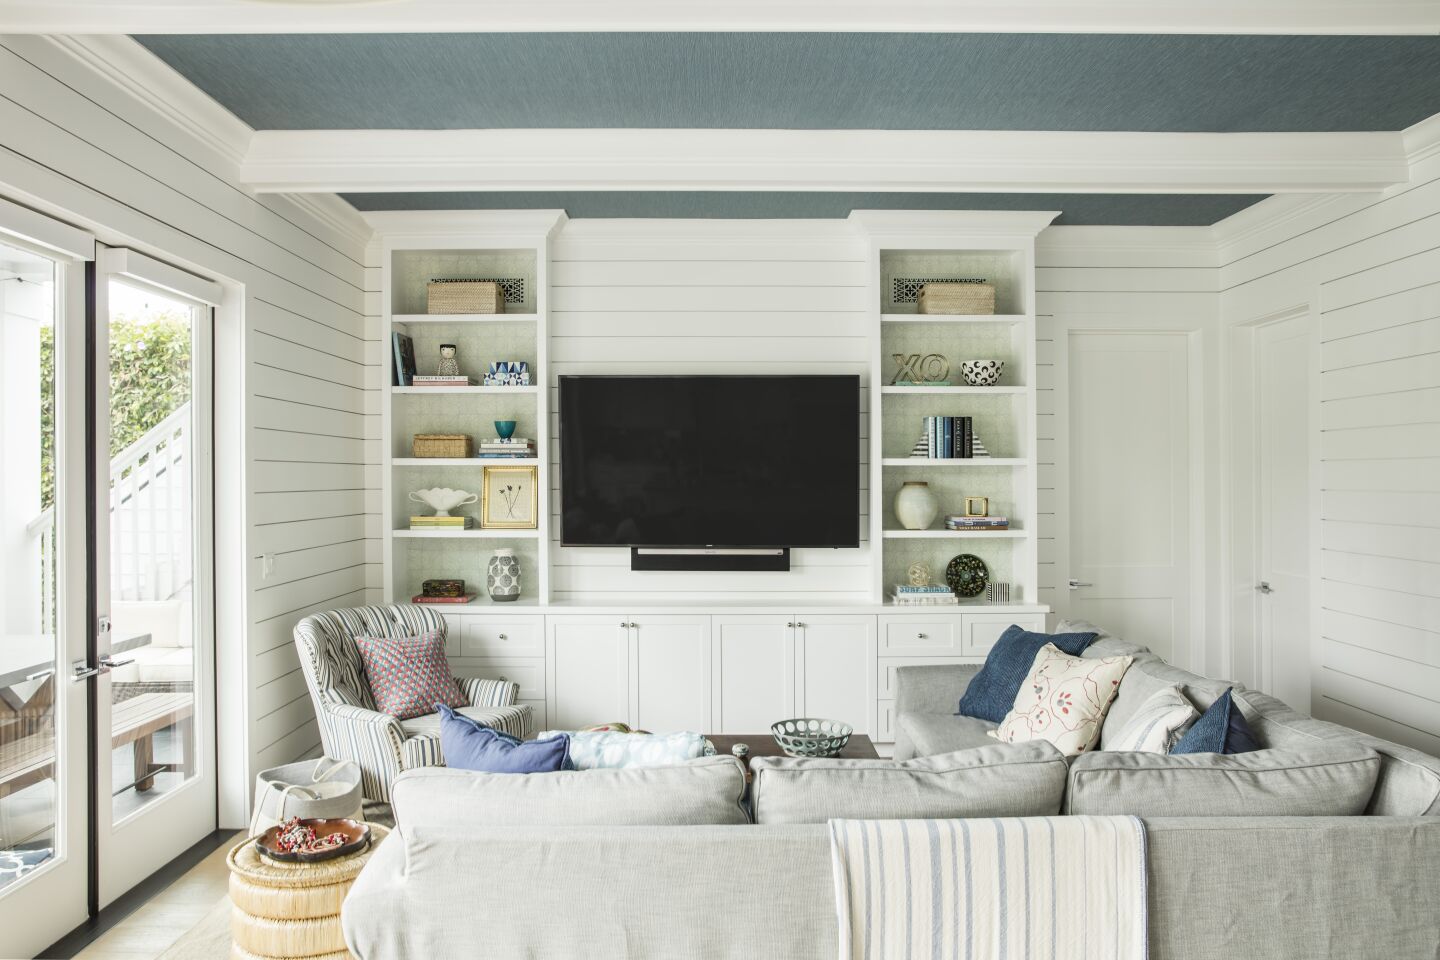 ... and after. Interior designer Christine Markatos Lowe toned down the white shiplap with blue grasscloth on the ceiling and a new built-in entertainment center.